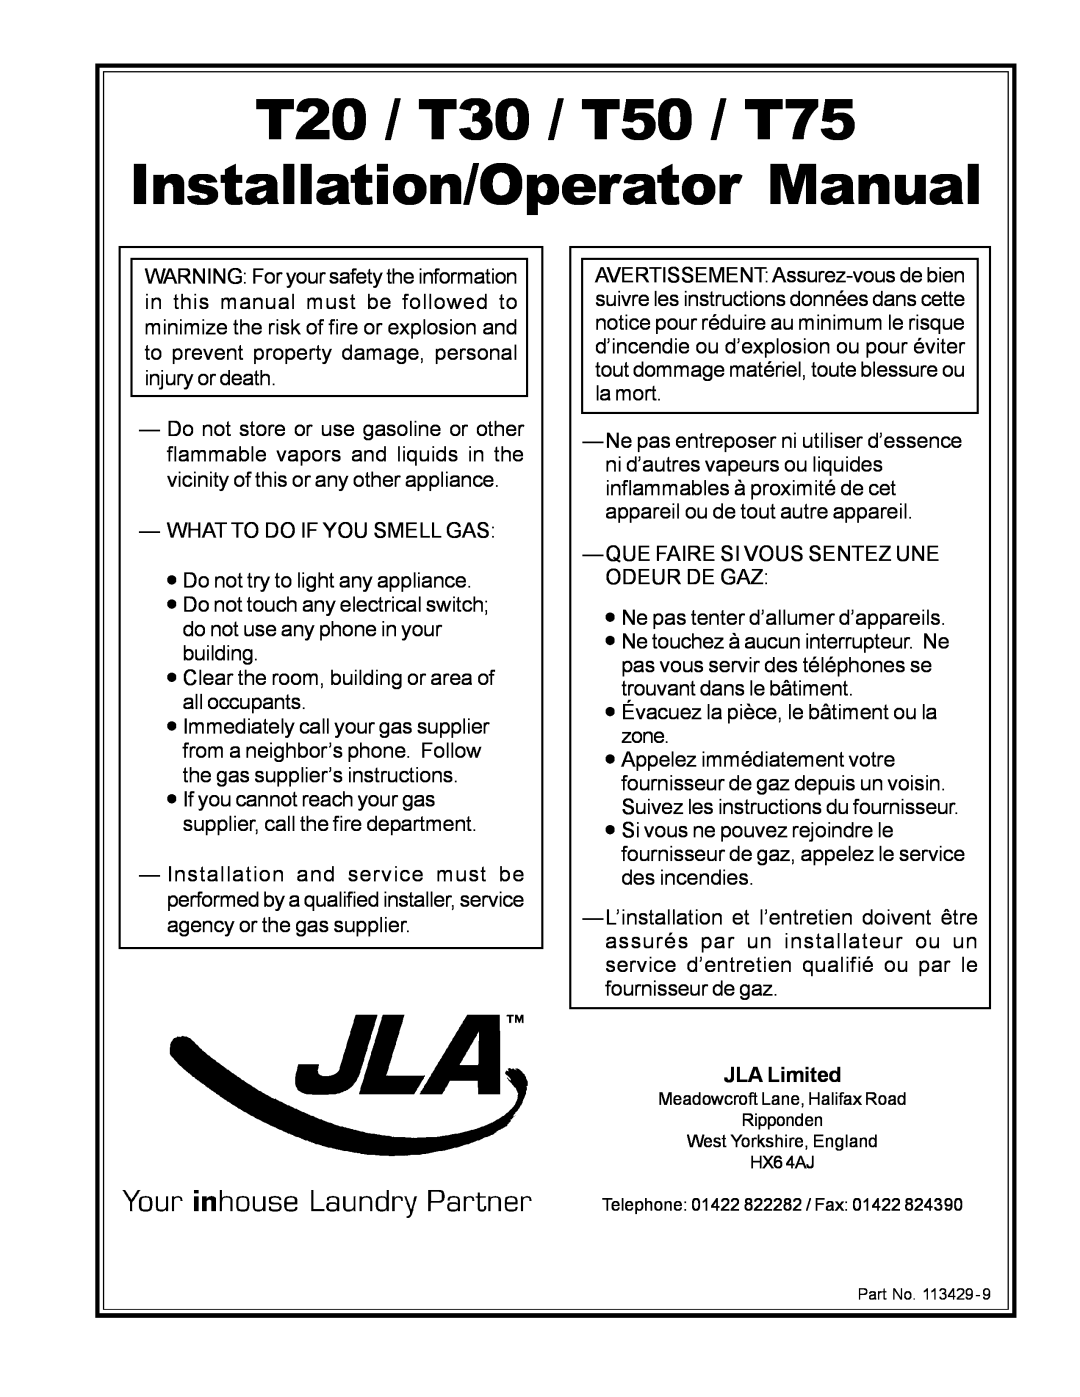 American Dryer Corp manual JLA Limited, T20 / T30 / T50 / T75 Installation/Operator Manual 